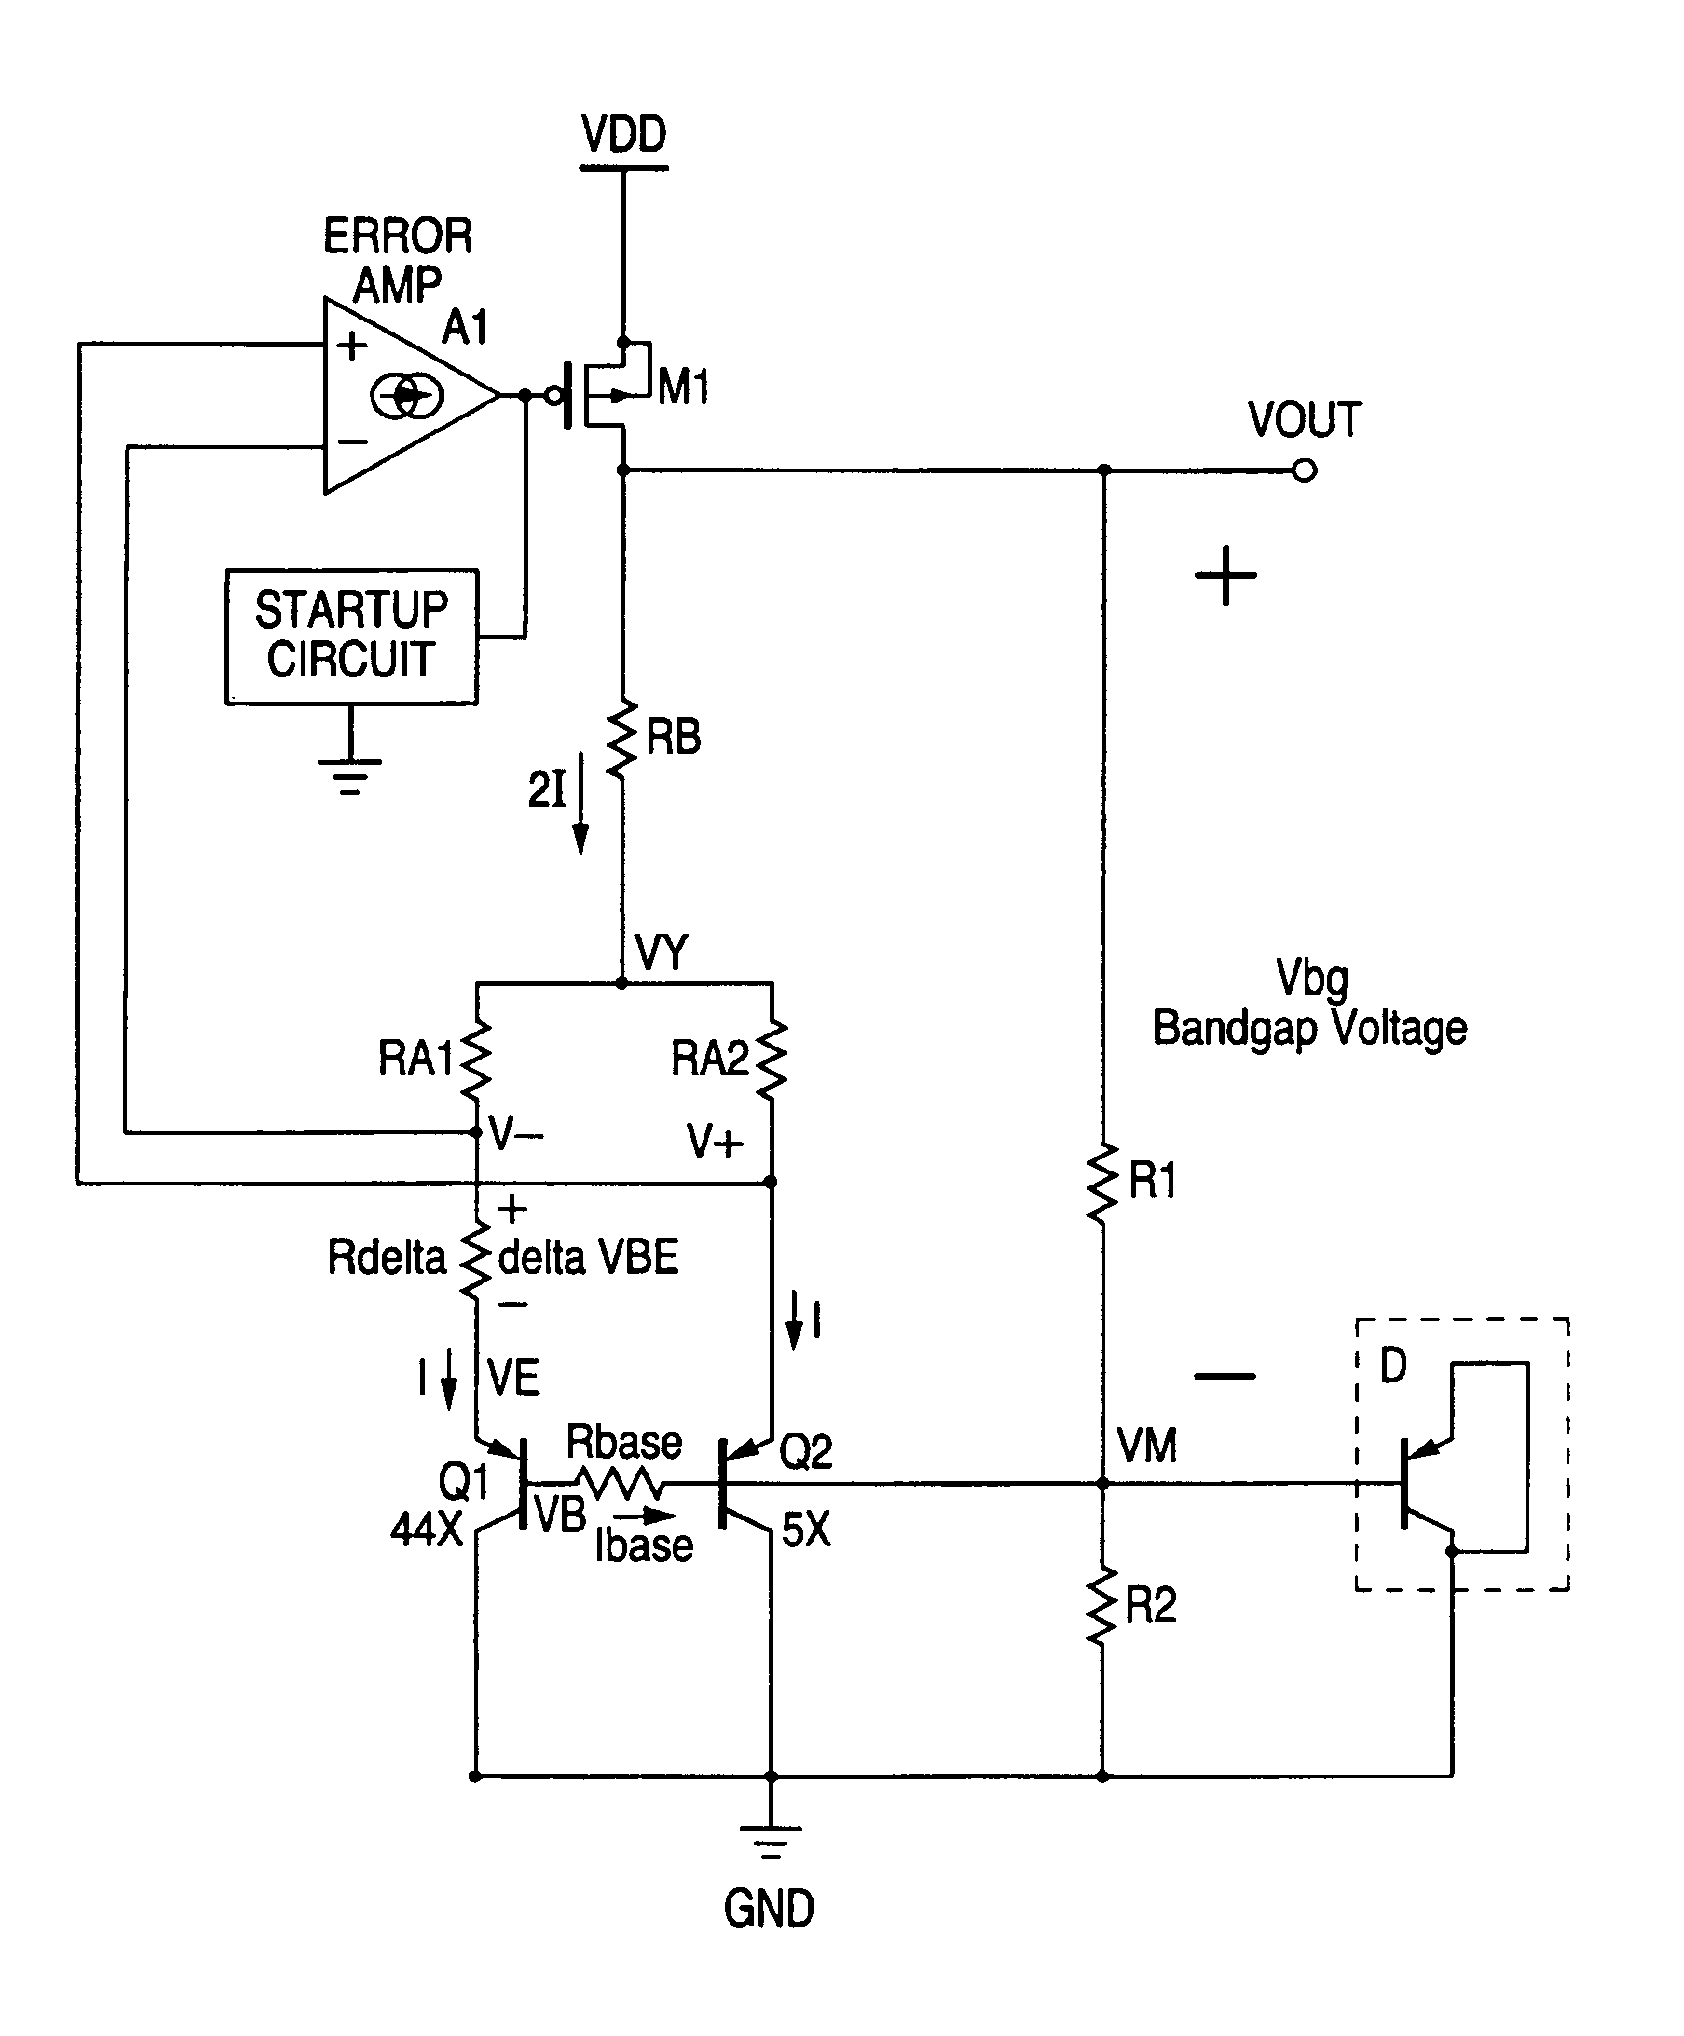 Metal oxide semiconductor (MOS) bandgap voltage reference circuit